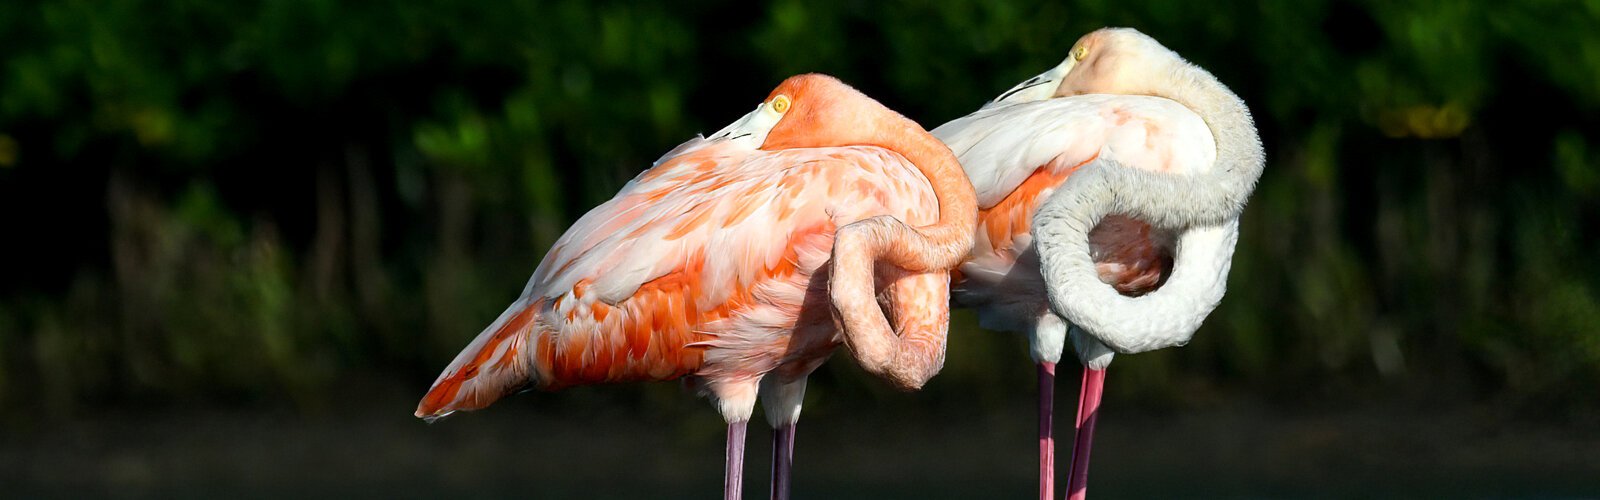 This beautiful pair of flamingos was doing everything in sync, preening, eating, sleeping. They were photographed with a long telephoto lens from a respectful distance.